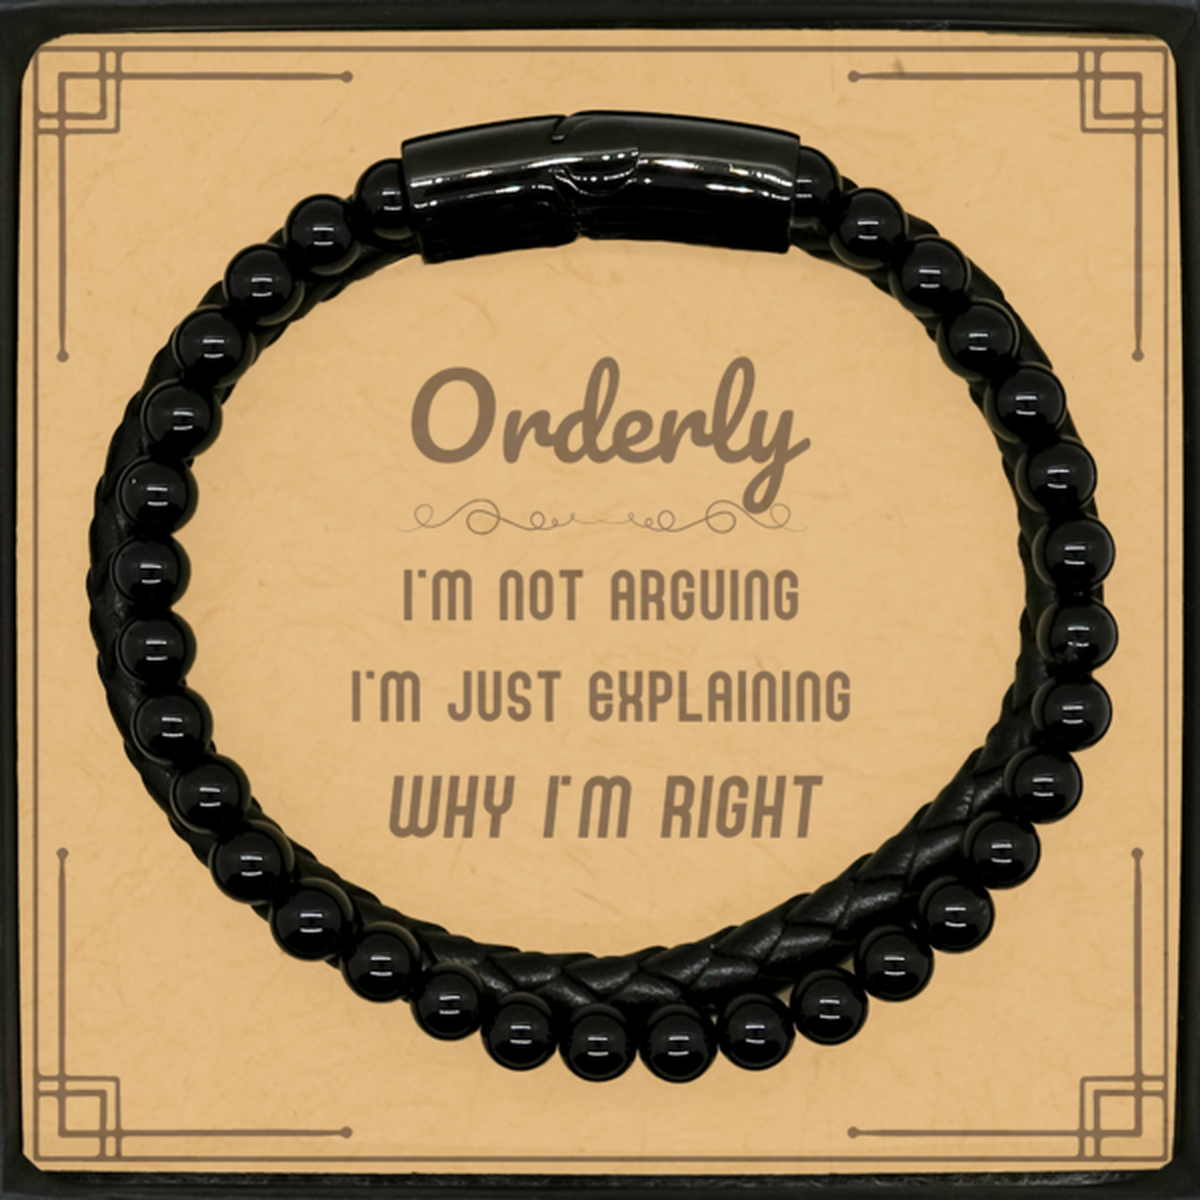 Orderly I'm not Arguing. I'm Just Explaining Why I'm RIGHT Stone Leather Bracelets, Funny Saying Quote Orderly Gifts For Orderly Message Card Graduation Birthday Christmas Gifts for Men Women Coworker